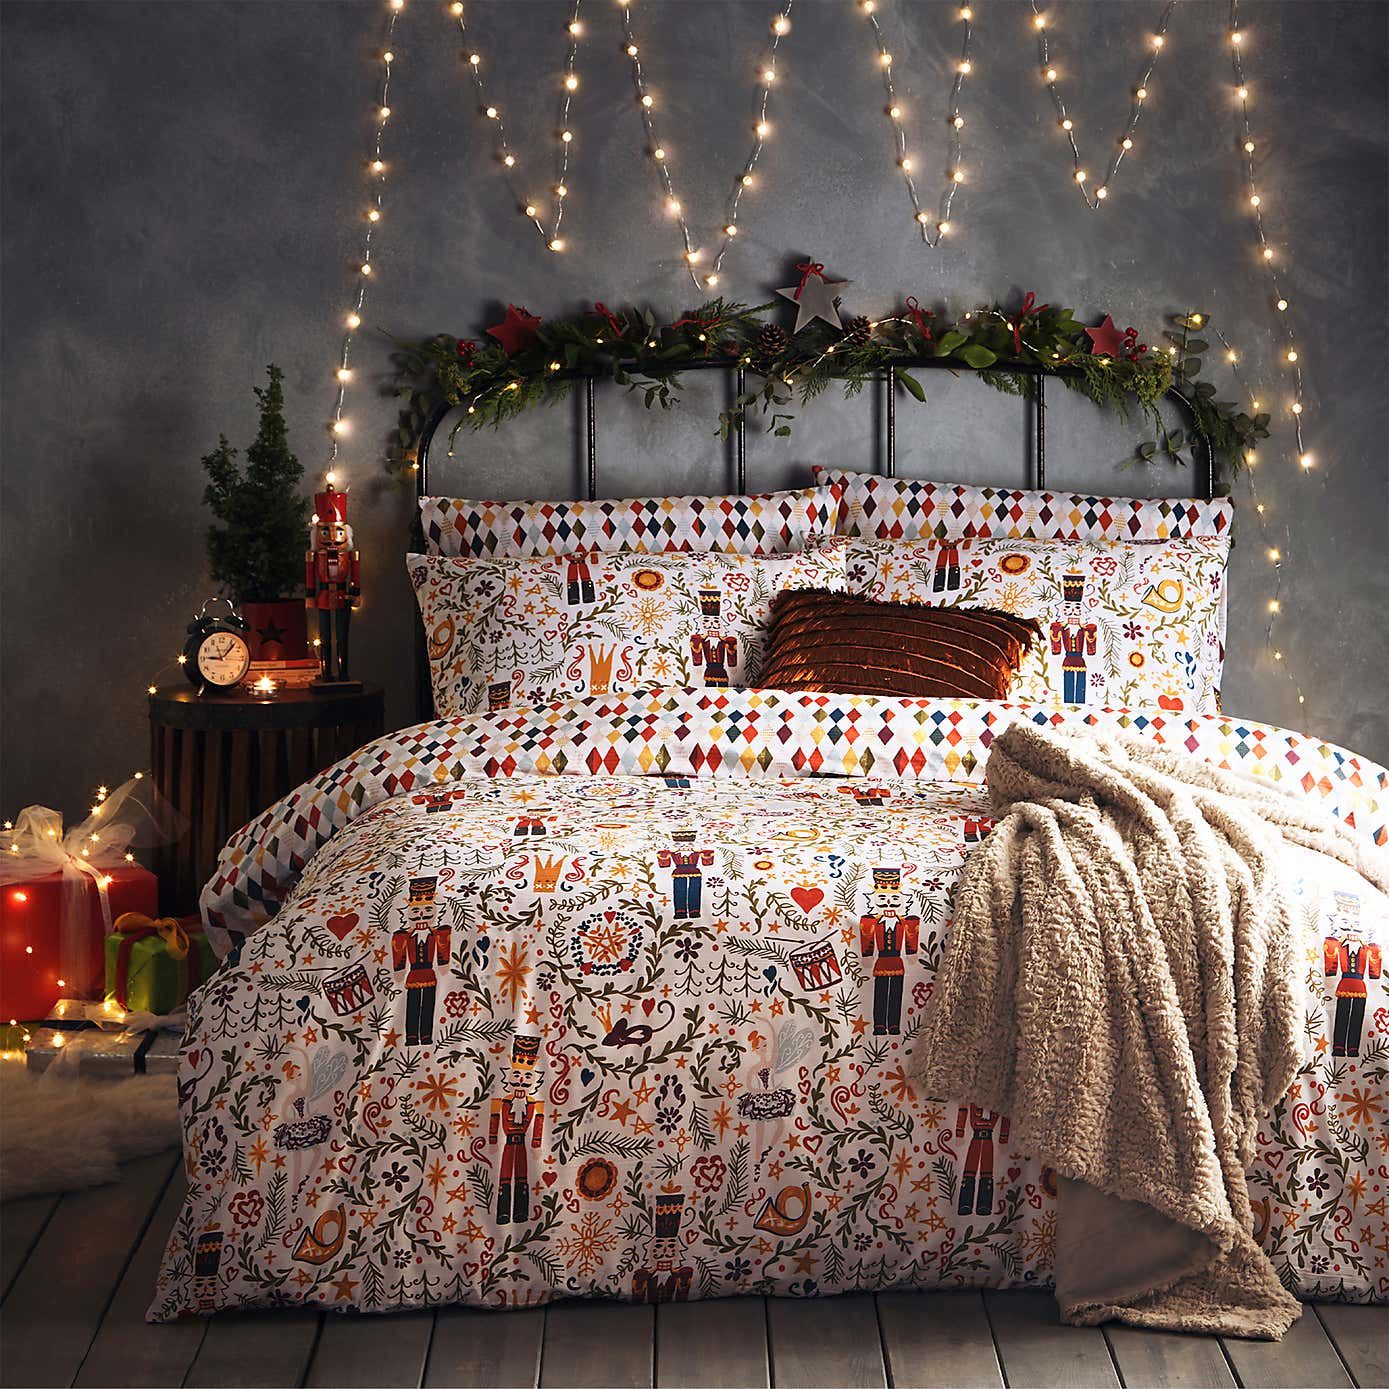 LET IT SNOW BEDDING SET SNOWMAN PRESENTS GIFTS SNOW BLUE RED GREEN XMAS TREE 